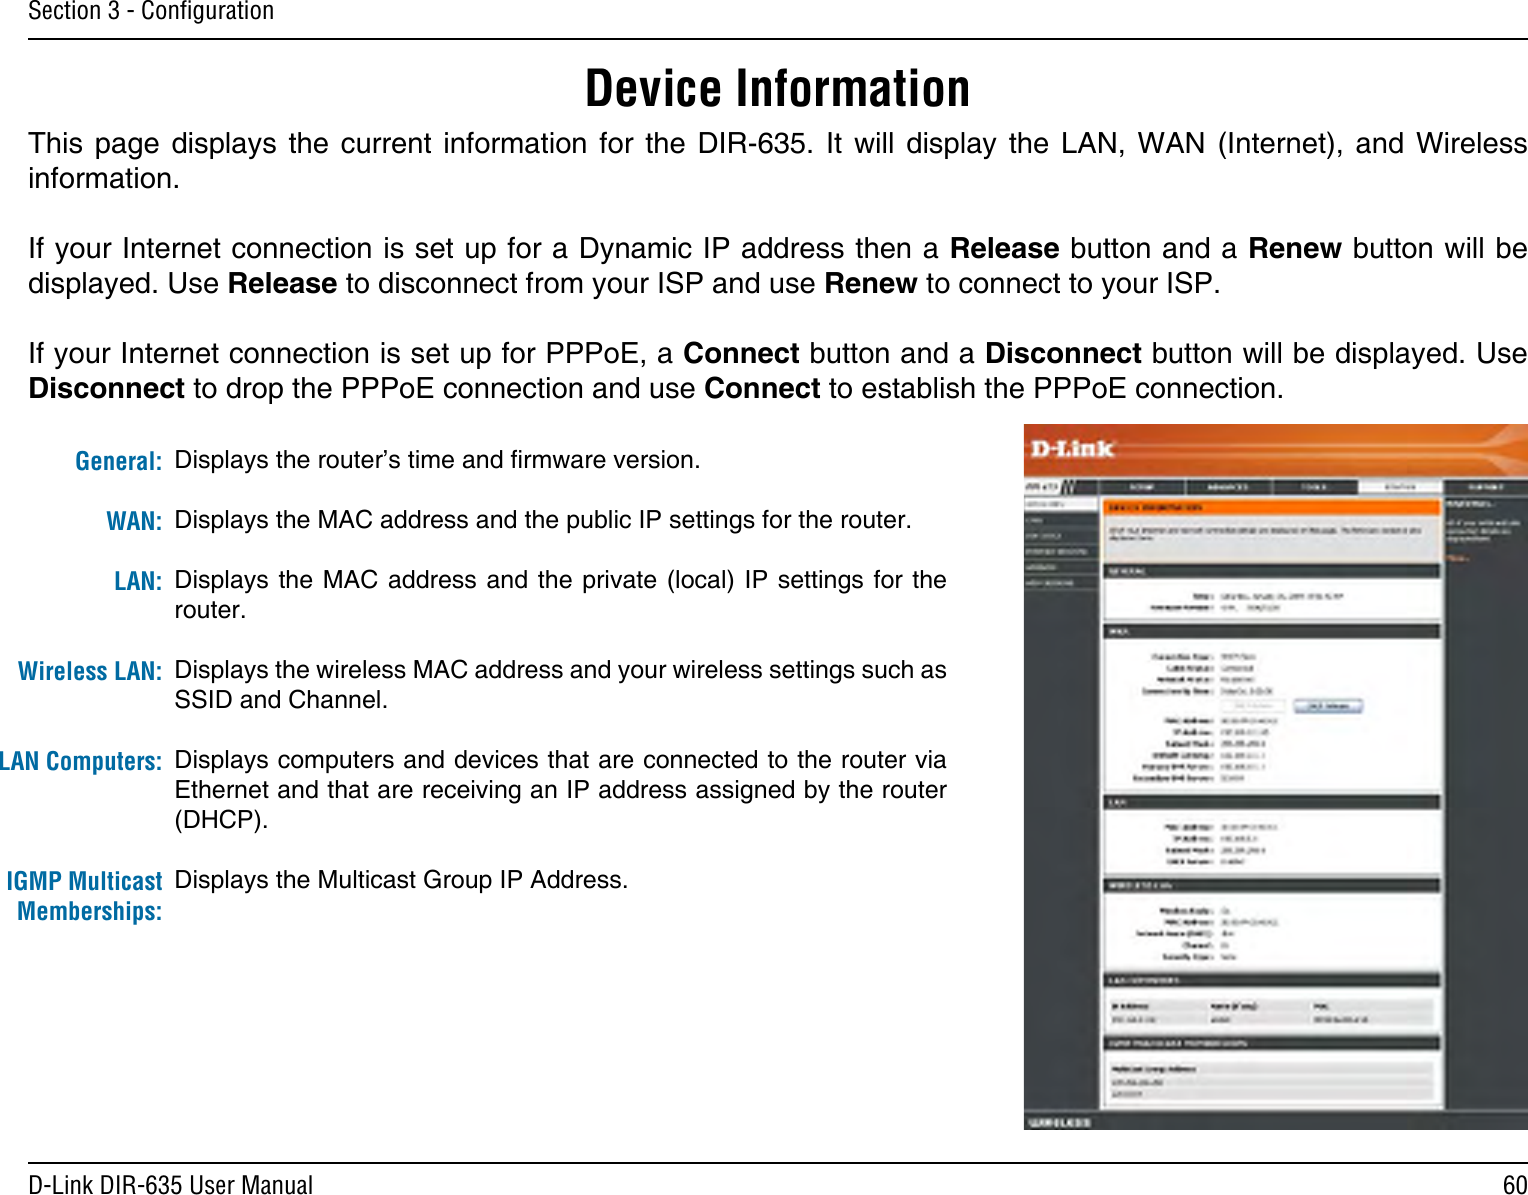 60D-Link DIR-635 User ManualSection 3 - ConﬁgurationThis  page  displays  the  current  information  for  the  DIR-635.  It  will  display  the  LAN,  WAN  (Internet),  and  Wireless information.If your Internet connection is set up for a Dynamic IP address then a Release button and a Renew button will be displayed. Use Release to disconnect from your ISP and use Renew to connect to your ISP. If your Internet connection is set up for PPPoE, a Connect button and a Disconnect button will be displayed. Use Disconnect to drop the PPPoE connection and use Connect to establish the PPPoE connection.Displays the router’s time and rmware version.Displays the MAC address and the public IP settings for the router.Displays the MAC  address and the private (local)  IP  settings for the router.Displays the wireless MAC address and your wireless settings such as SSID and Channel.Displays computers and devices that are connected to the router via Ethernet and that are receiving an IP address assigned by the router (DHCP). Displays the Multicast Group IP Address.General:WAN:LAN:Wireless LAN:LAN Computers:IGMP Multicast Memberships:Device Information